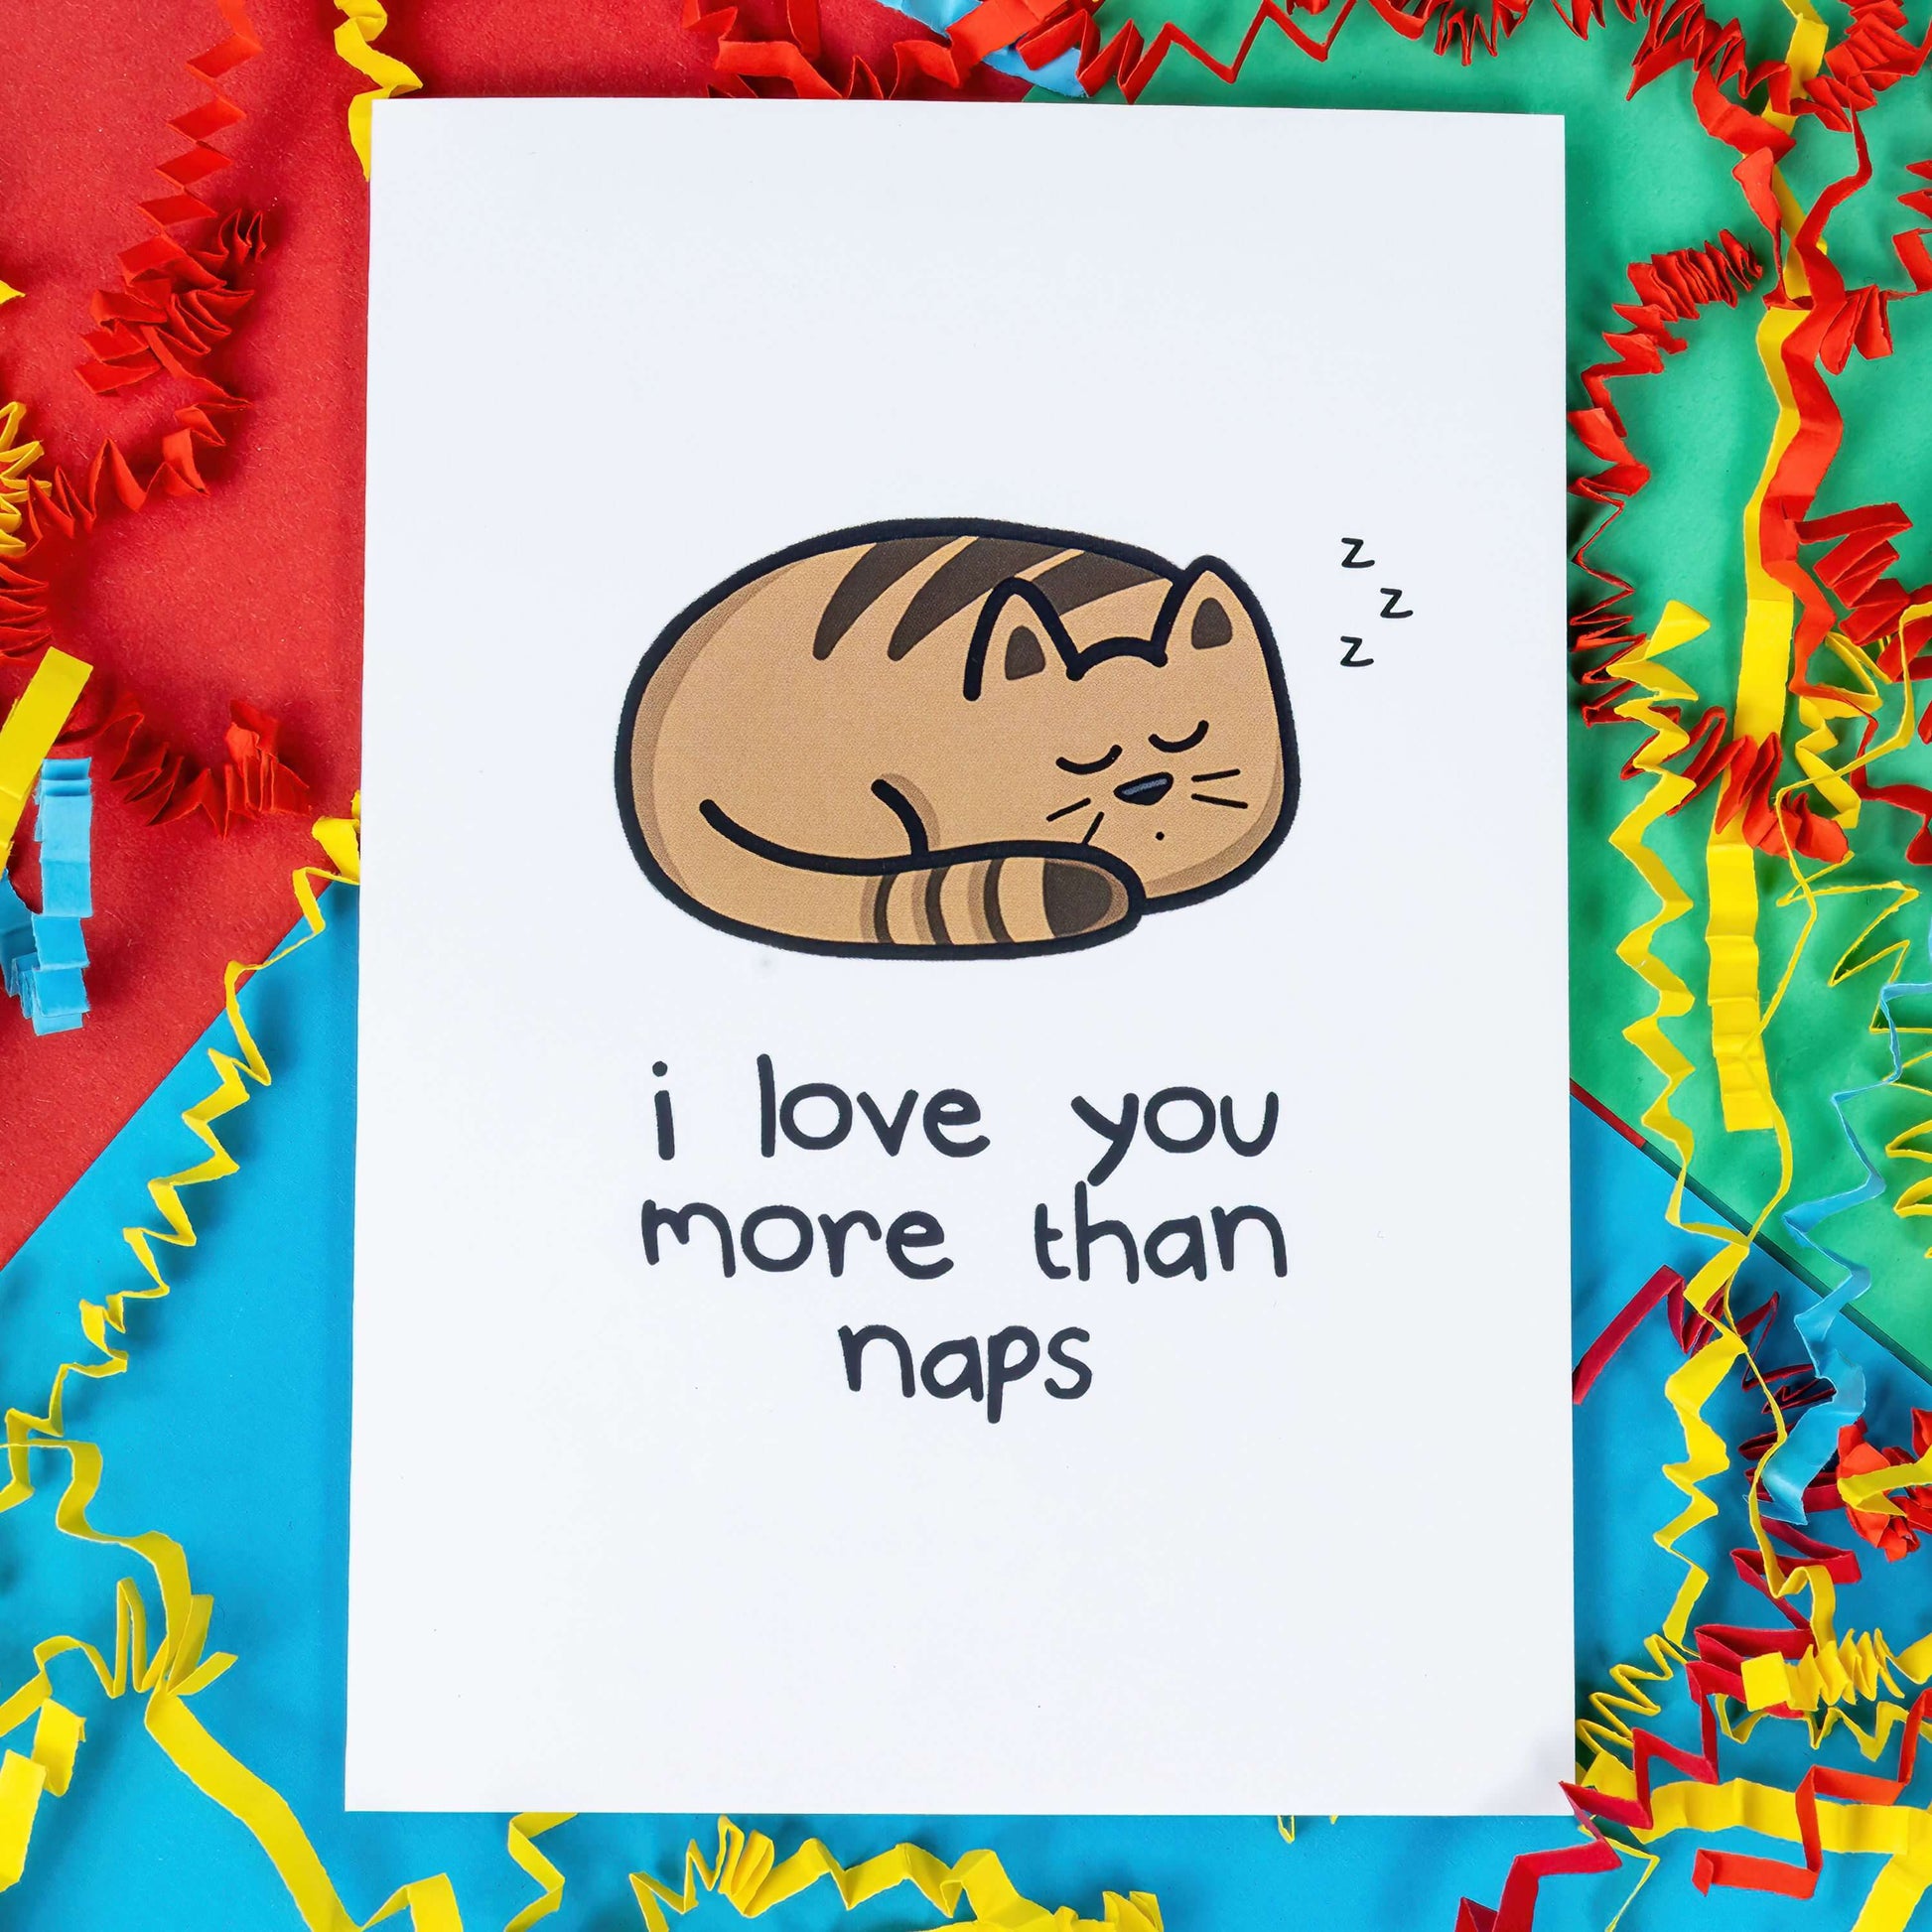 I love You More Than Naps - Cat Card on a red, blue and green background with coloured card confetti. The white card has an illustration of a sleeping tabby cat with black text underneath that reads 'I love you more than naps'.